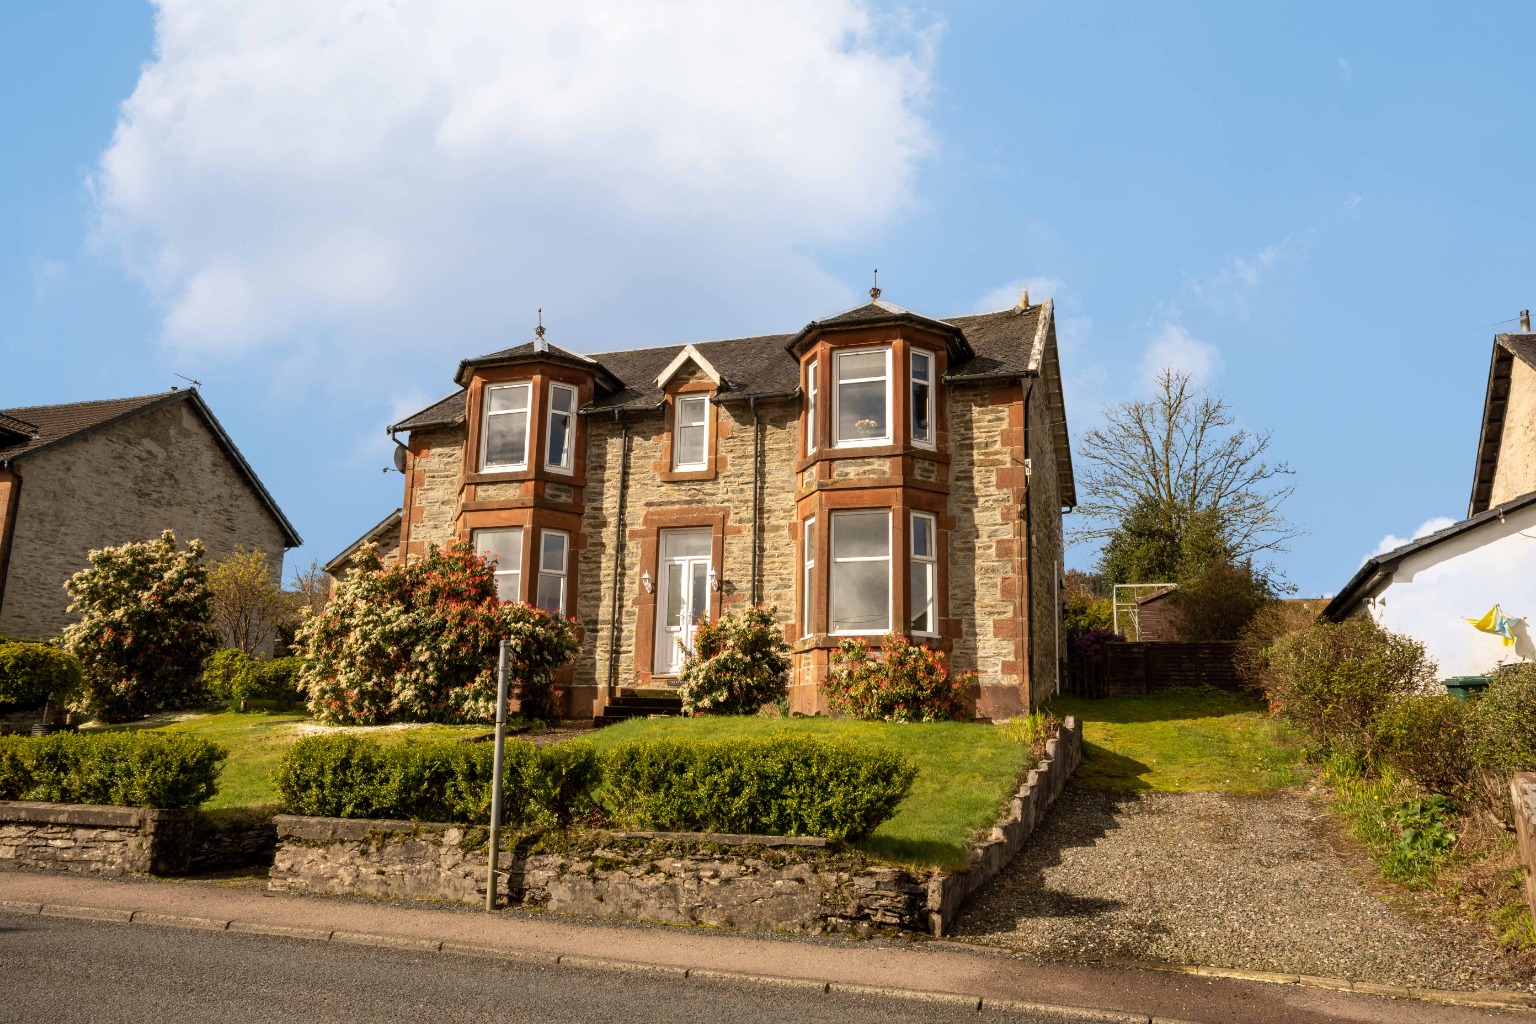 3 bed ground floor flat for sale, Dunoon - Property Image 1